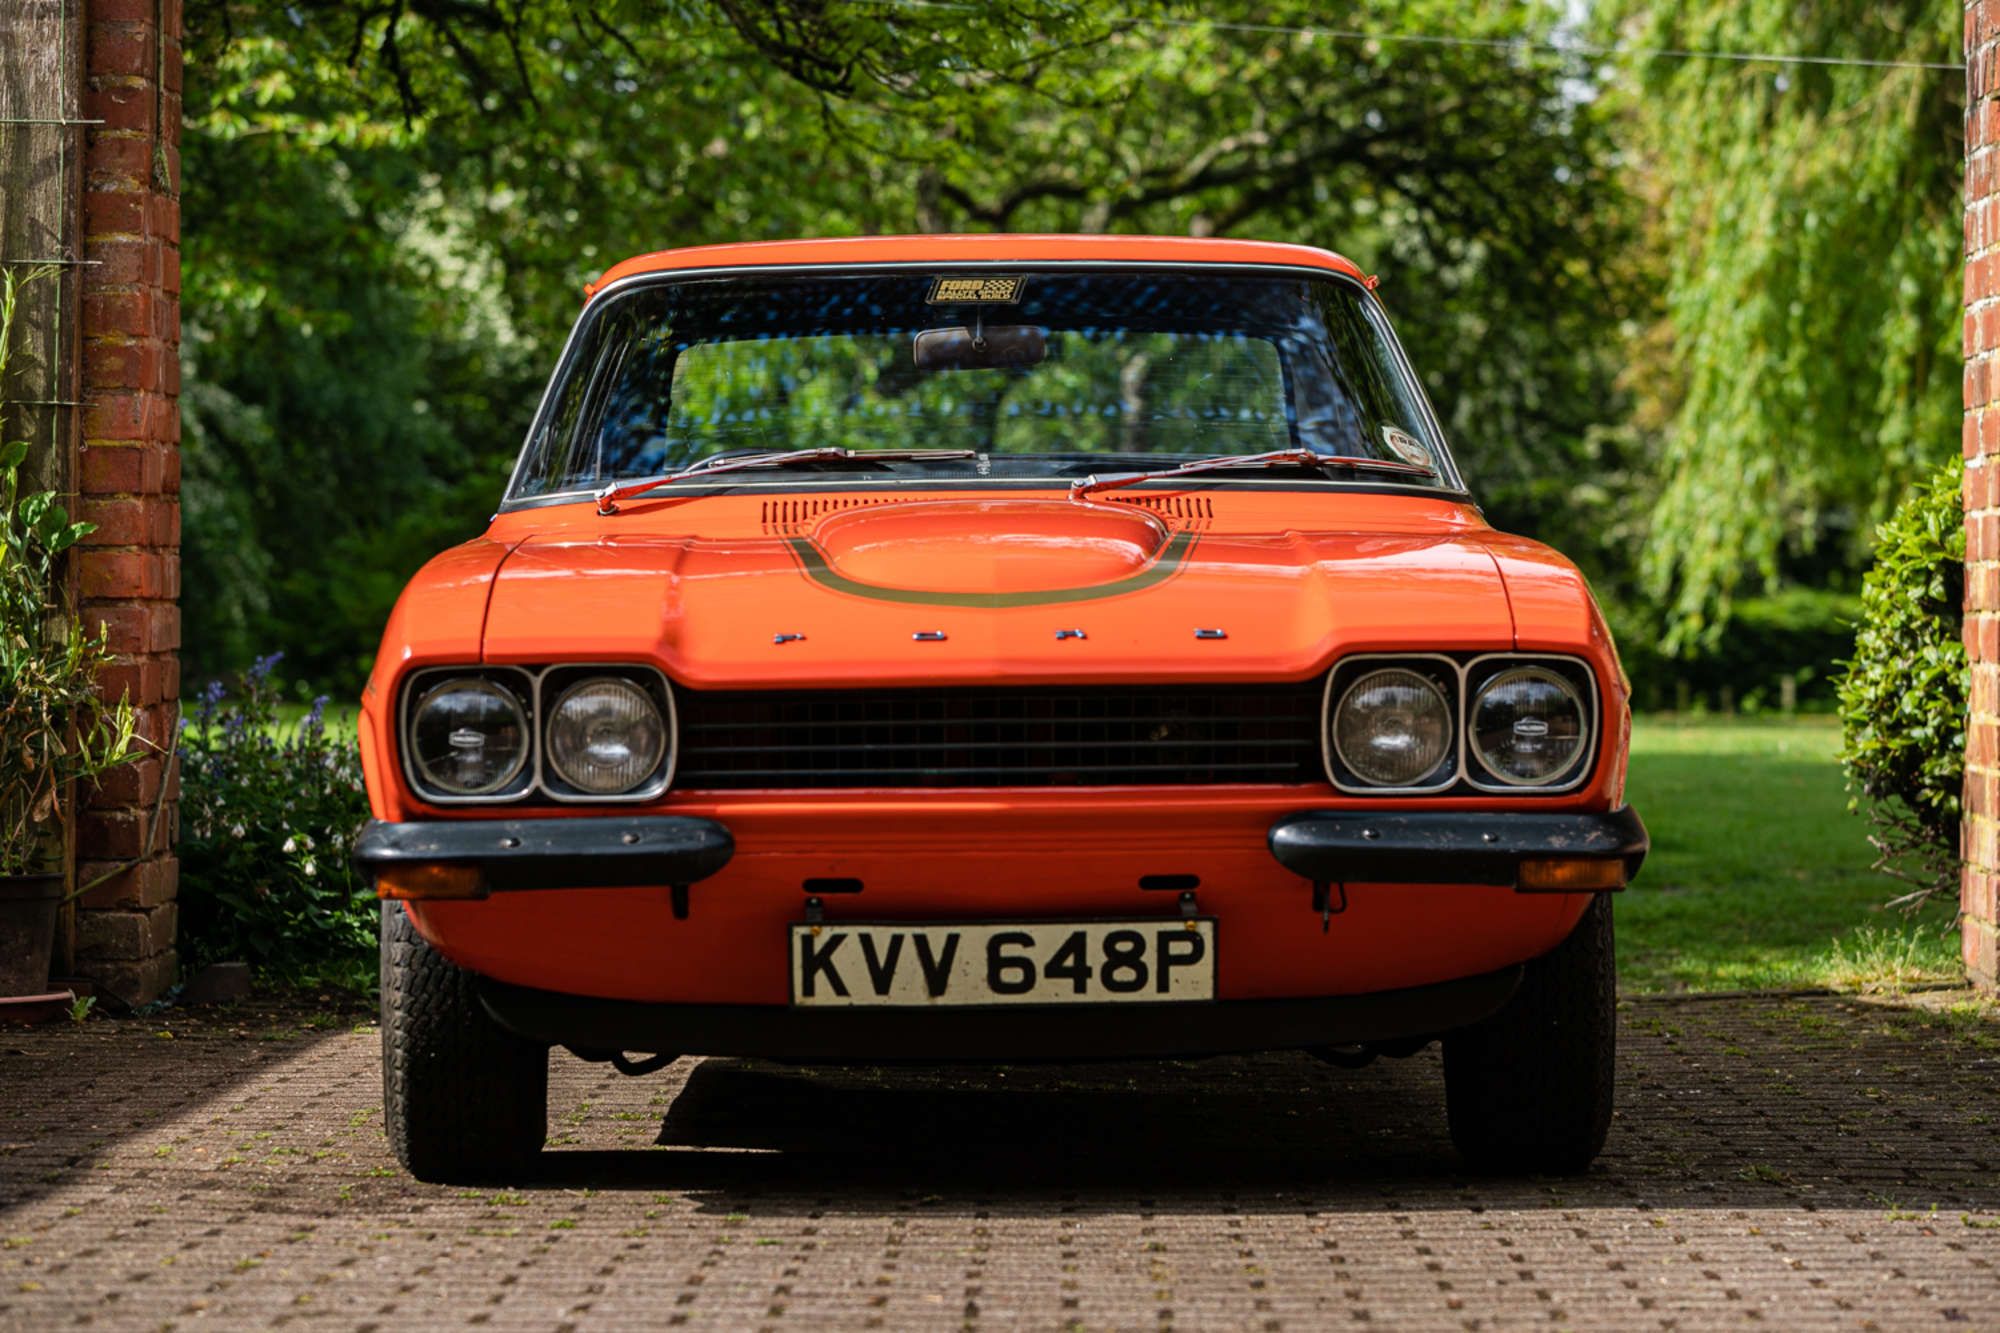 The 1975 Ford Capri RS3100 sold at a record price on auction.